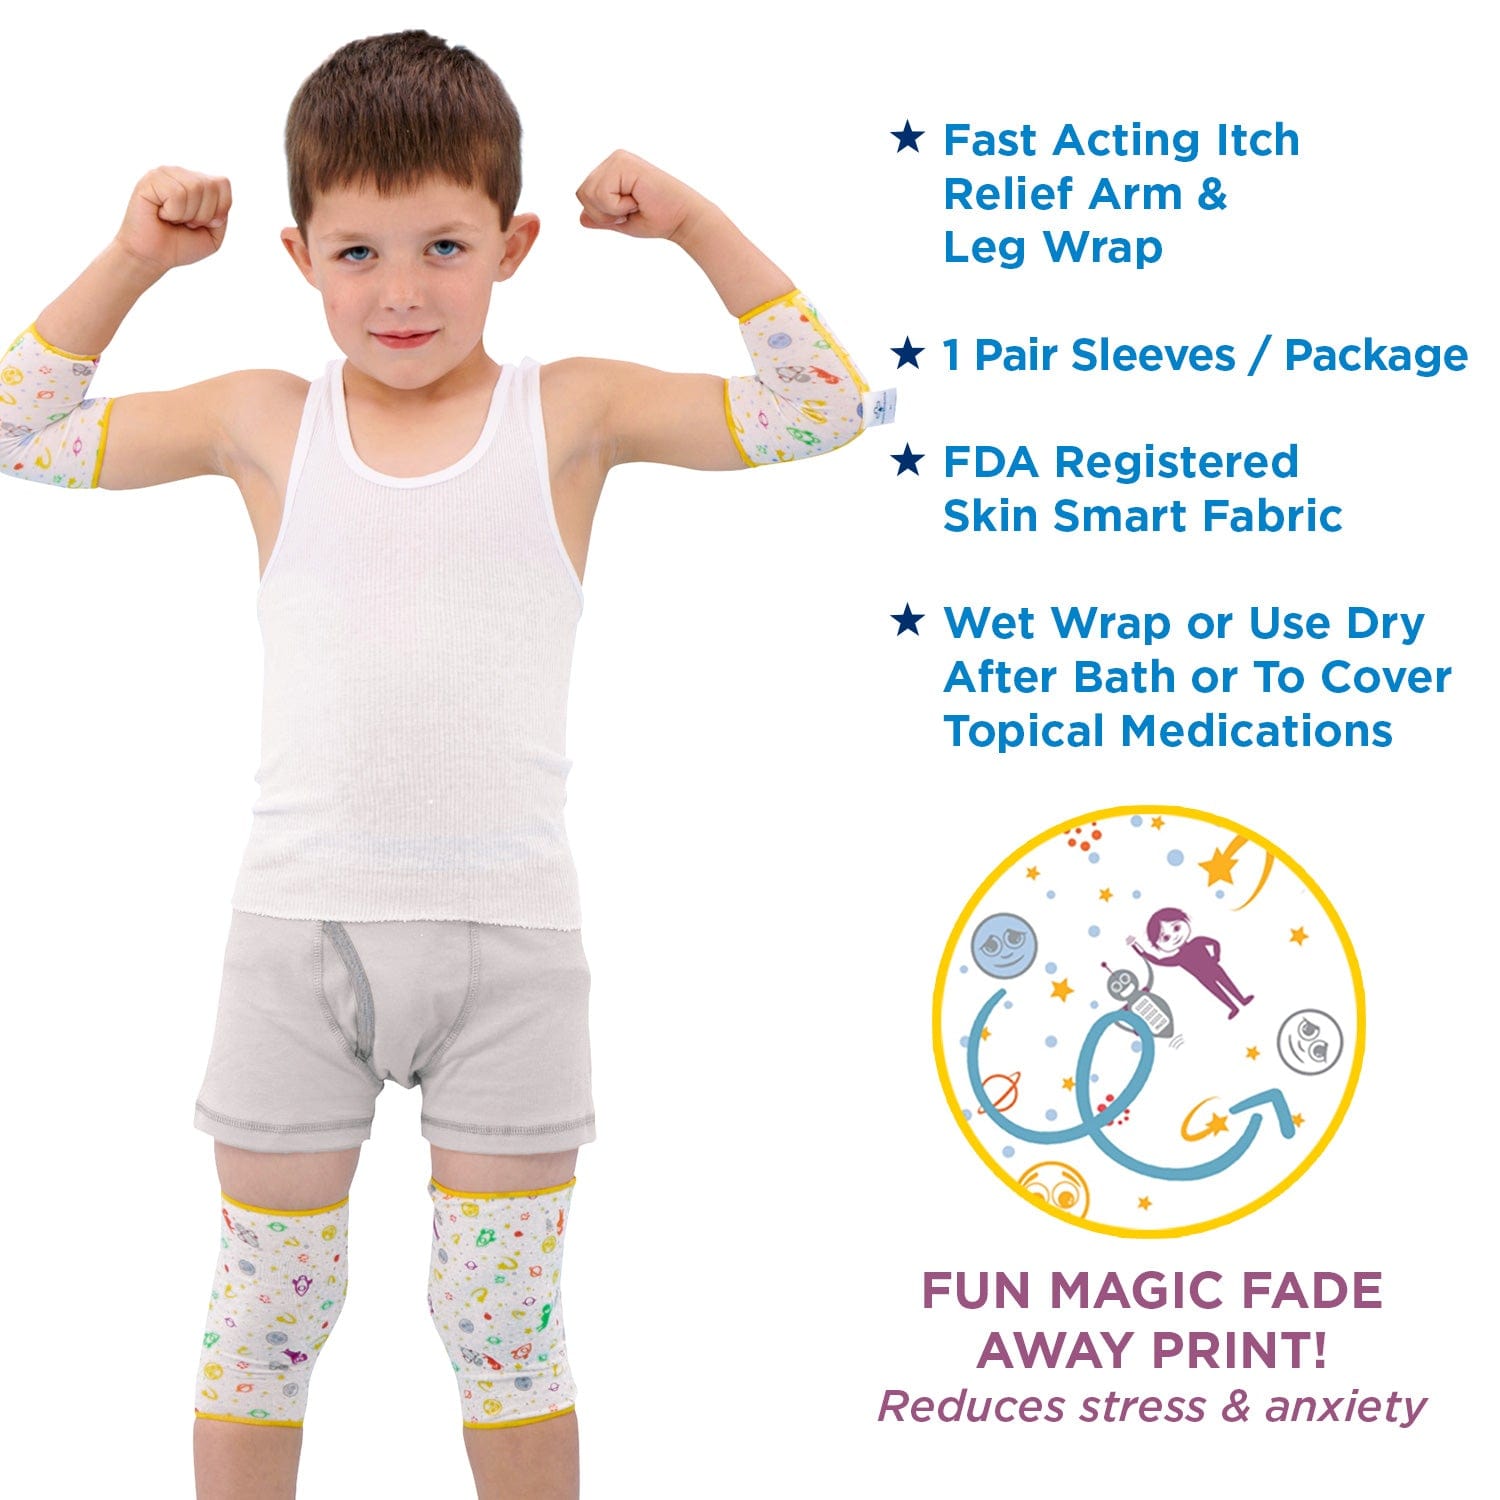 “Eczema sleeves bandages for children with irritation free seams for sensitive skin made from TENCEL  with zinc oxide to Prevent scratching throughout the day and during sleep”